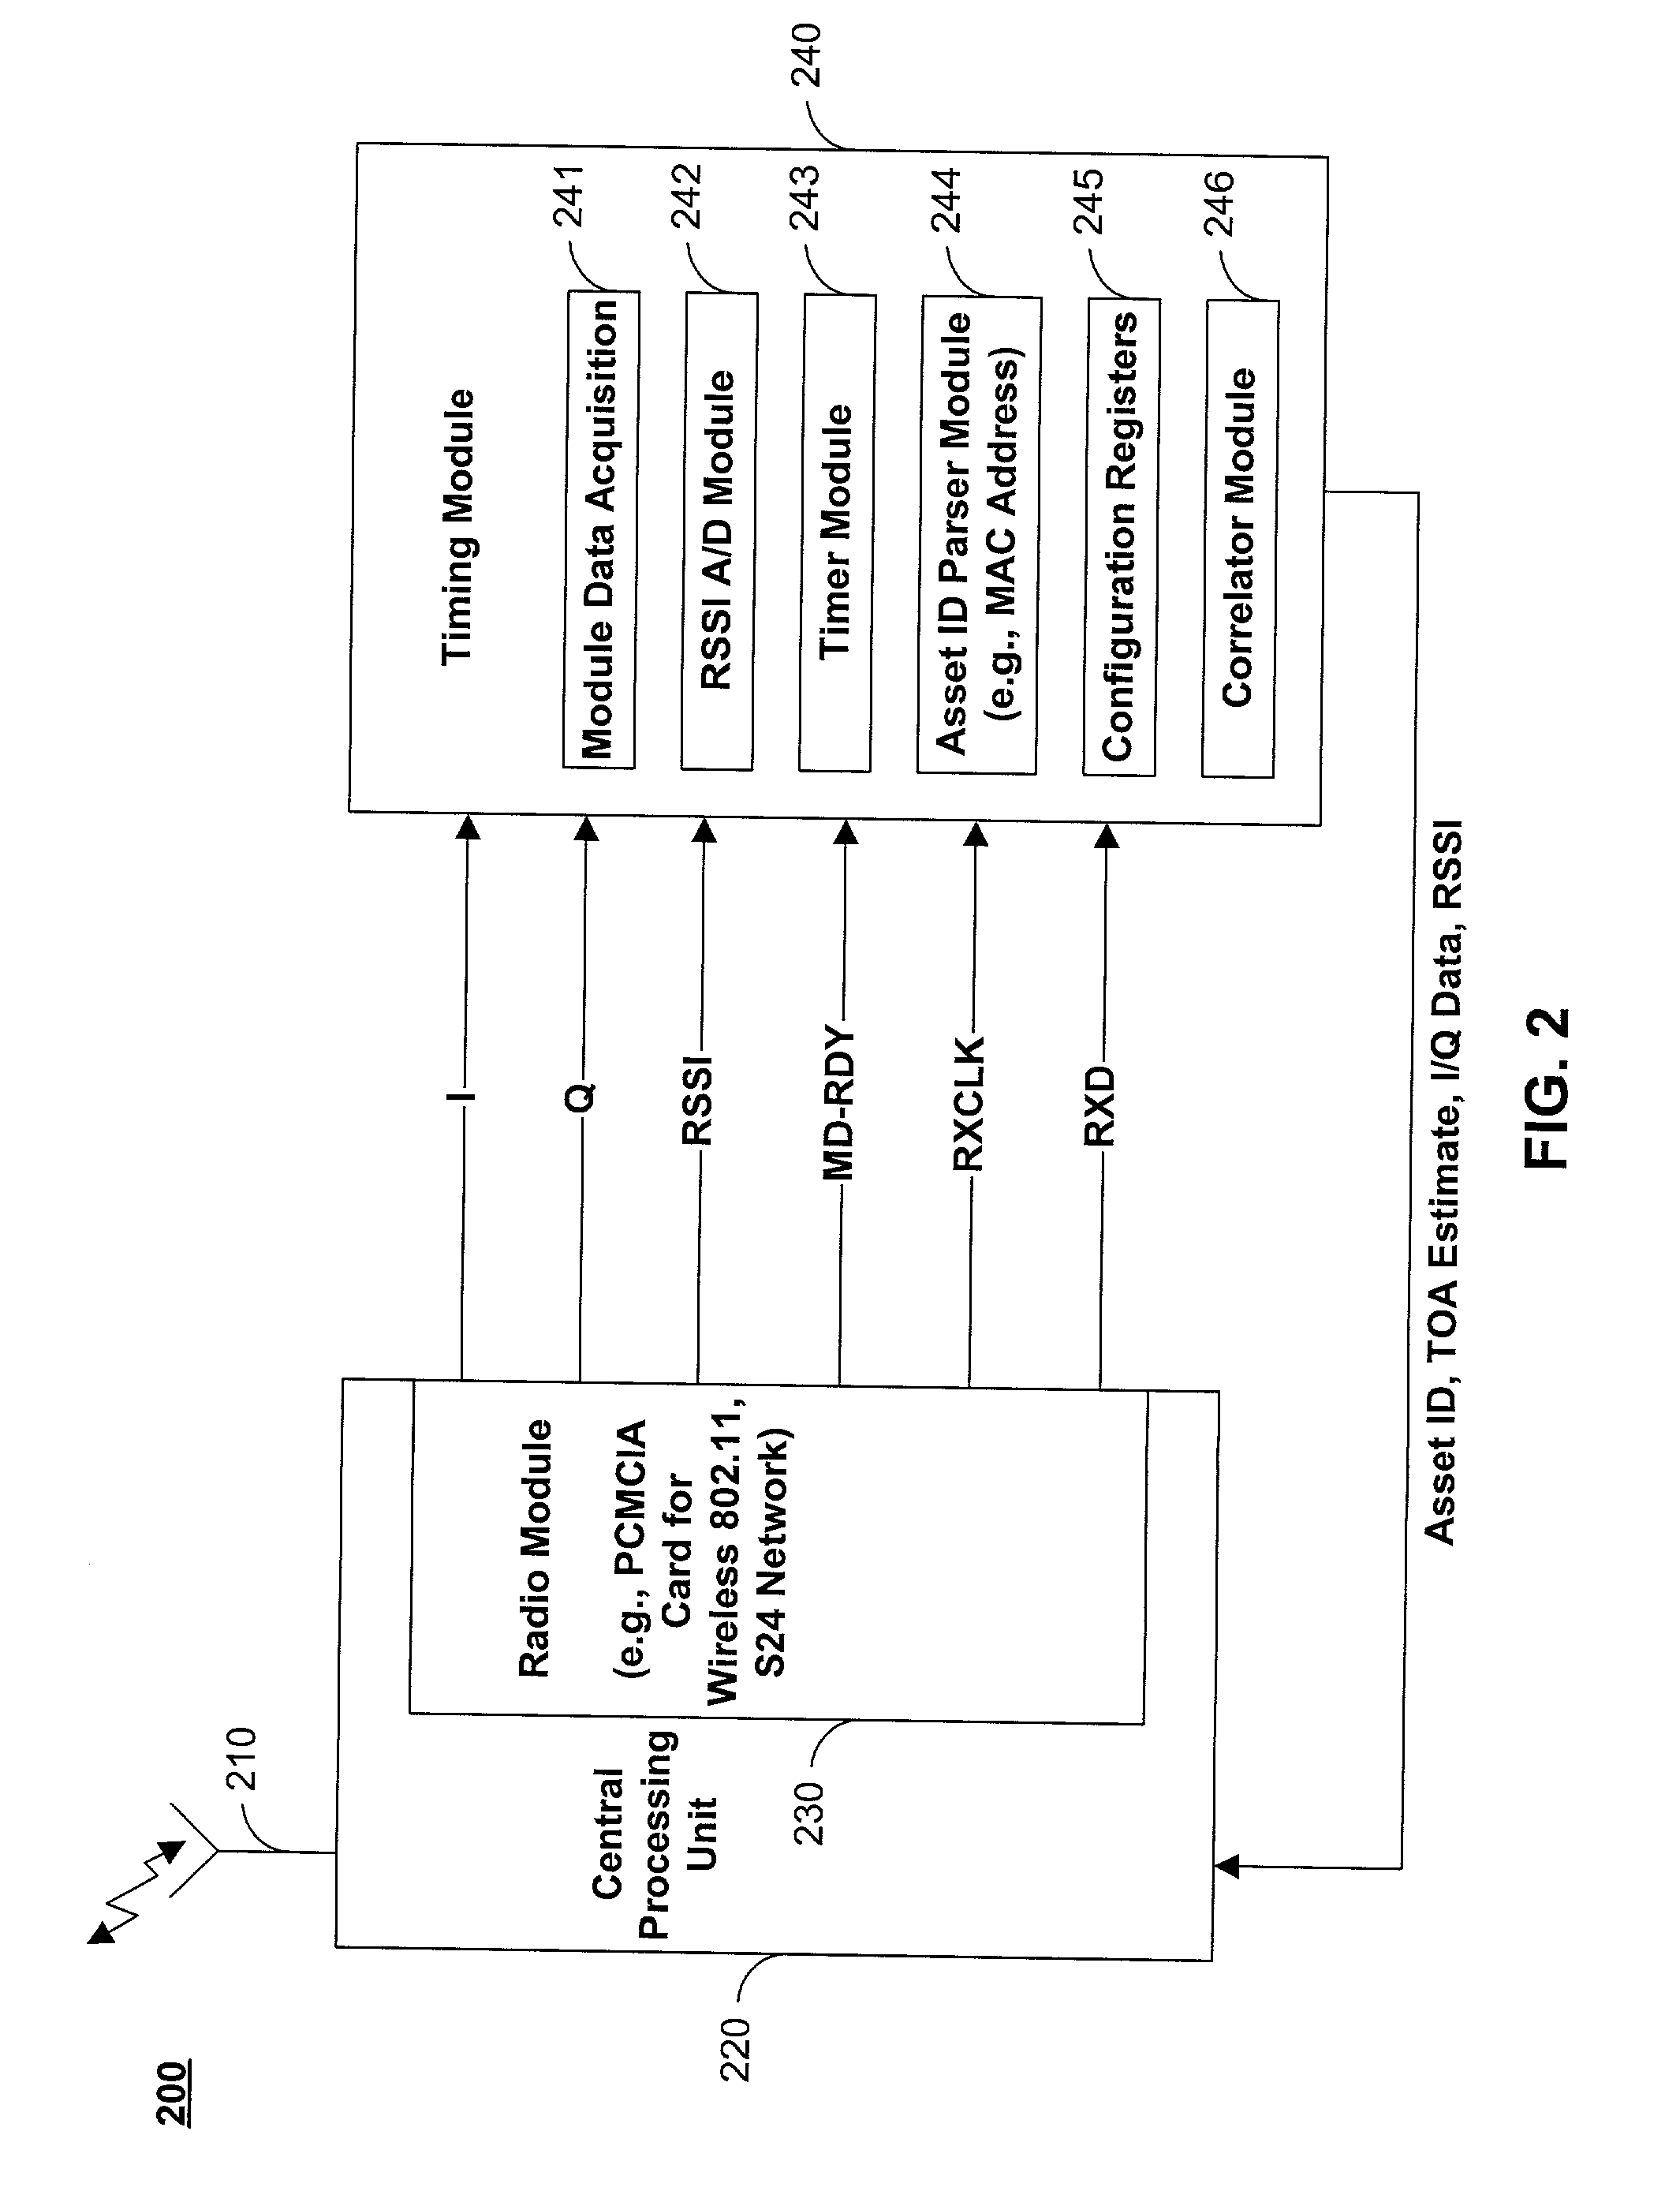 Methods and apparatus for identifying asset location in communication networks